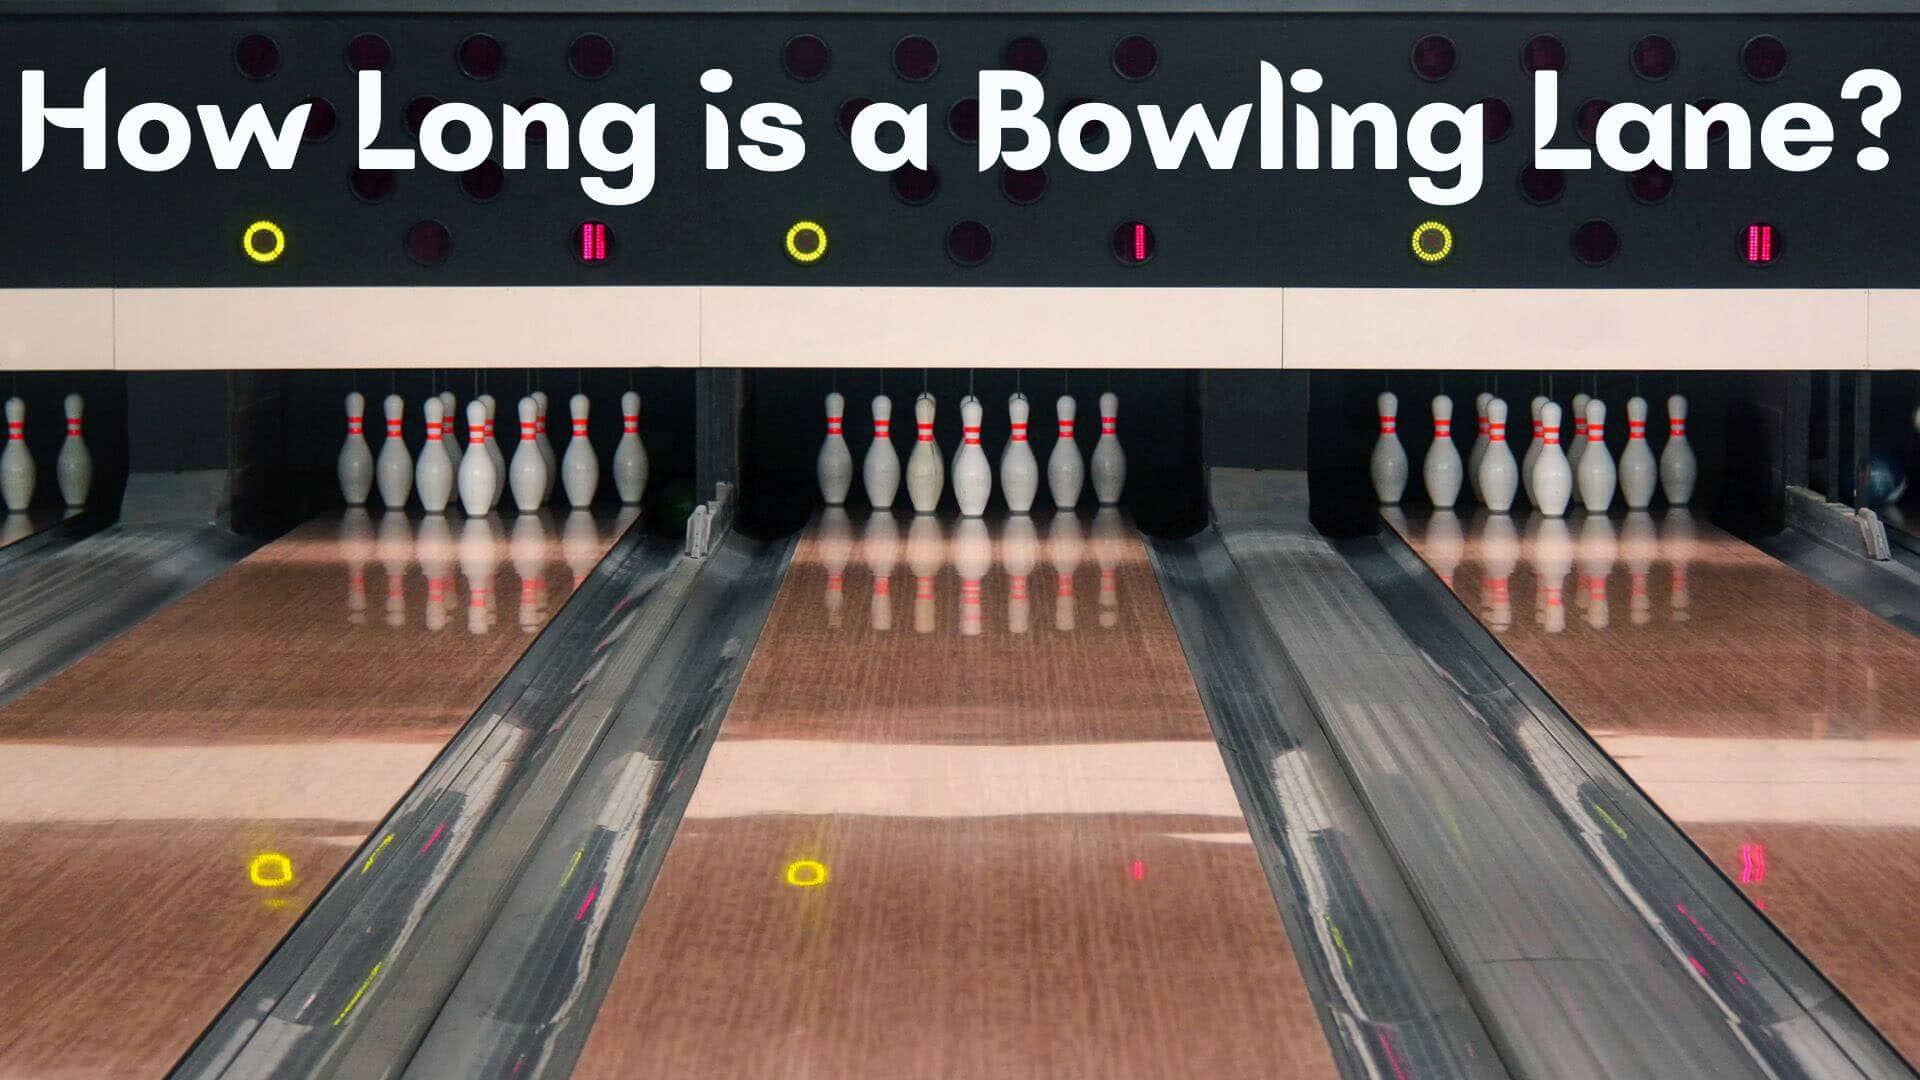 How Long is a Bowling Lane?